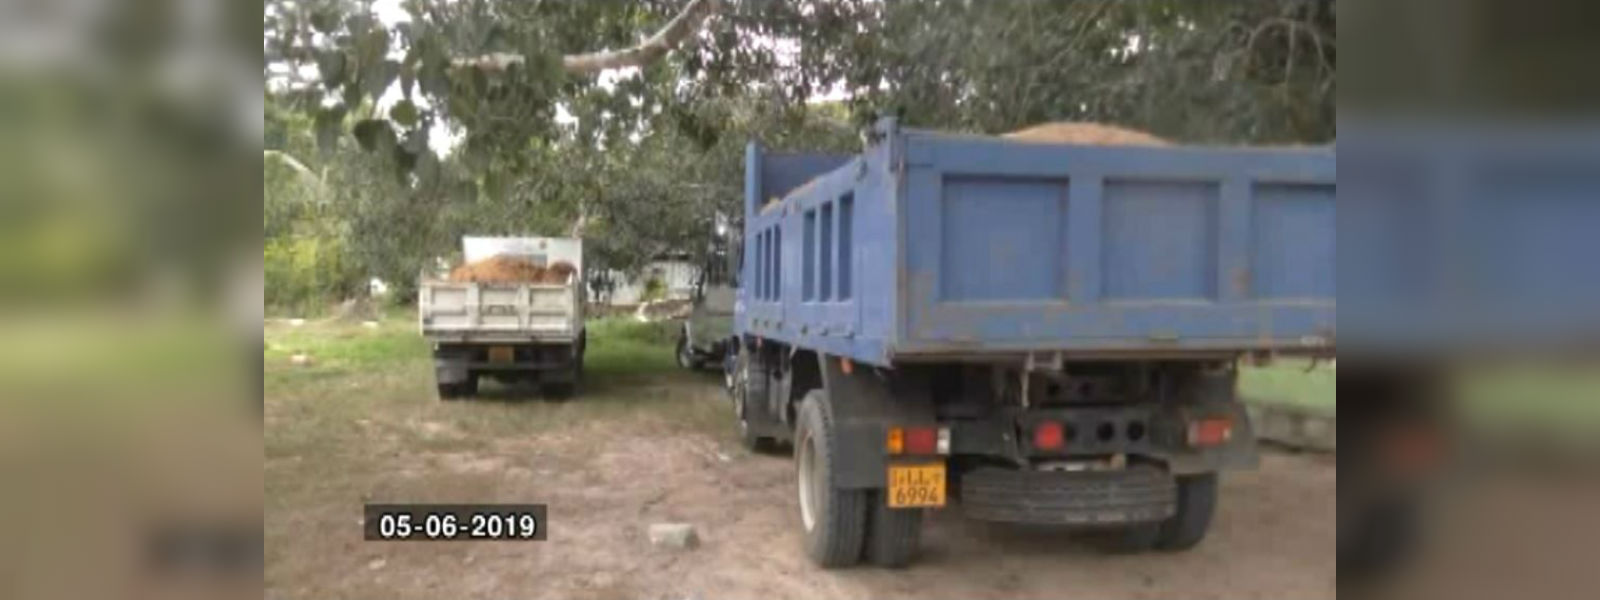 Pradeshiya Sabha tipper truck seized for illegally transporting soil to a private land